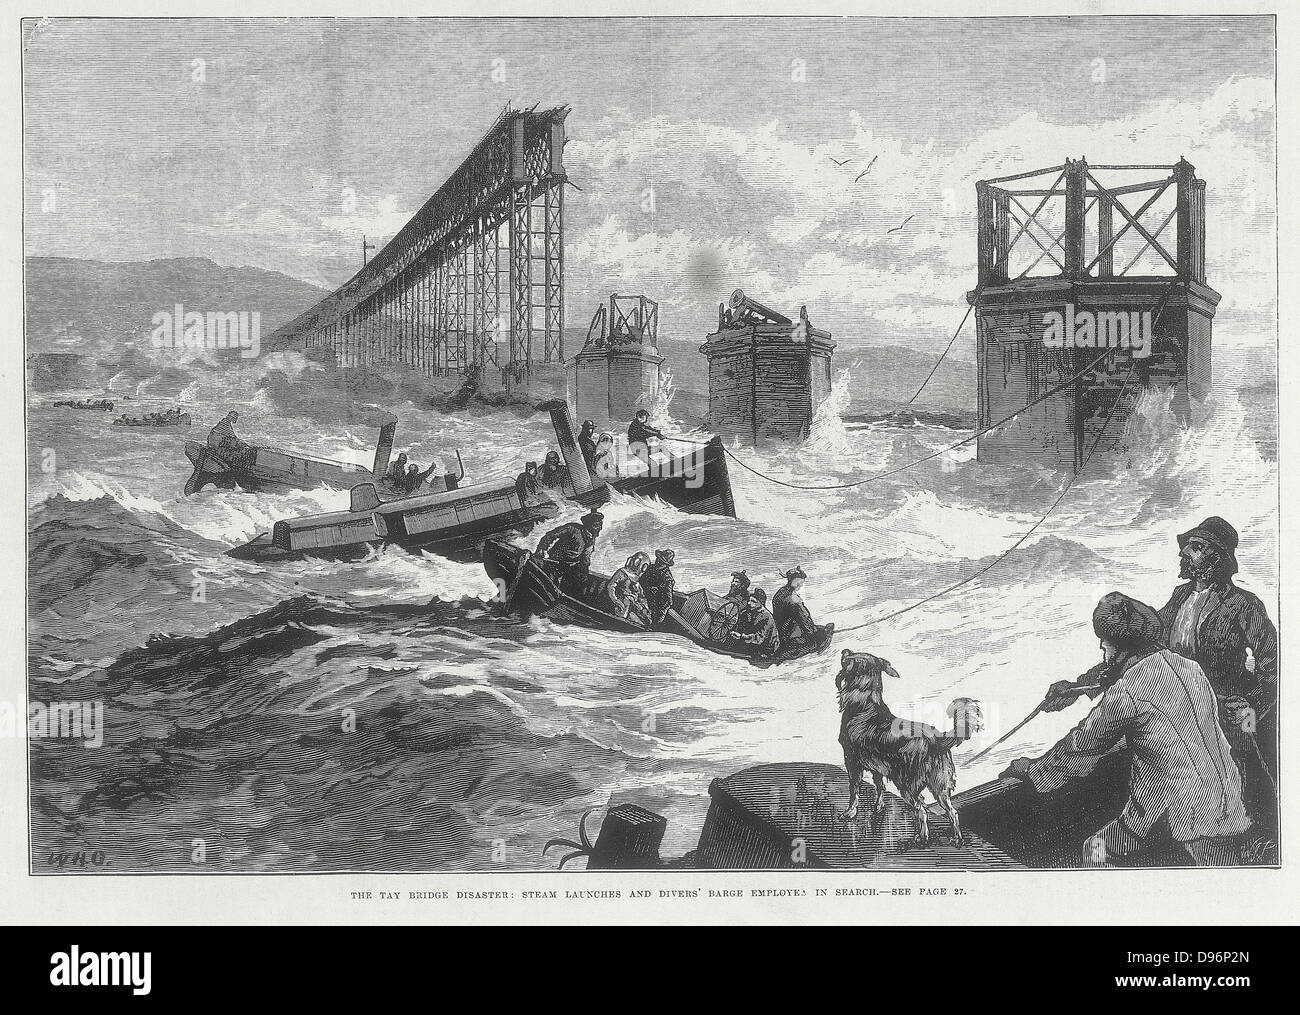 Tay Bridge disaster, 28 December  1879. Steam launches and divers' barge taking part in the search of the wreckage.  Engraving from 'The Illustrated London News', 1879. Stock Photo